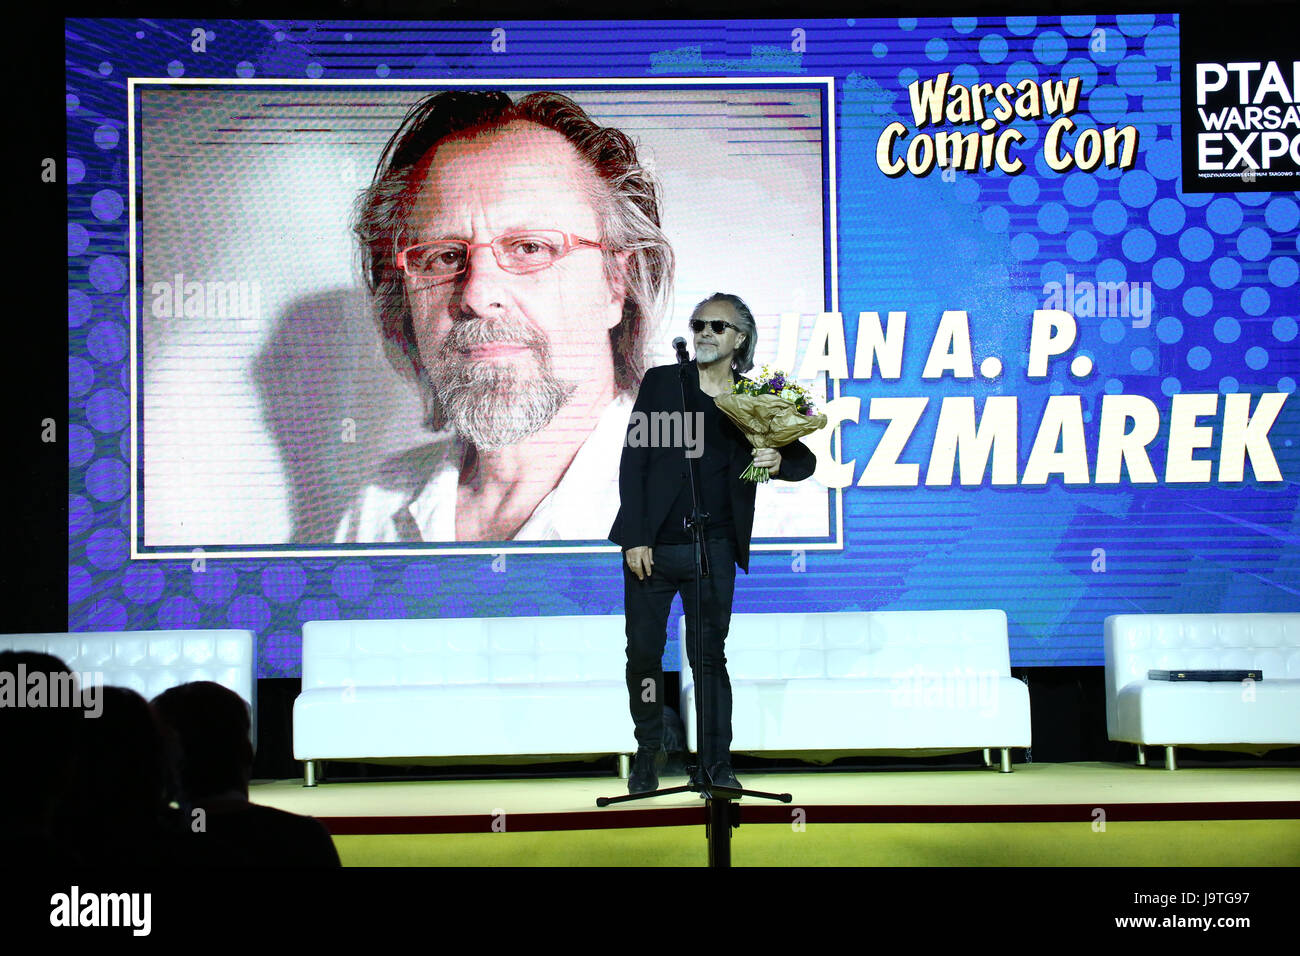 Poland, Nadarzyn, June 3rd, 2017: First Warsaw Comic Con hosts composer Jan Kaczmarek and actors Nadia Hilker, Melissa Ponzio, Carice van Houten, Hafpor Julius Björnsson and RJ Mitte. Ptak Warsaw Expo CEO Tomasz Szypula welcomes celebrity guest on stage. Thousands of cosplay, Star Wars and role palying fans hit the event. Game tournaments take place at several arenas. ©Jake Ratz/Alamy Live News Stock Photo